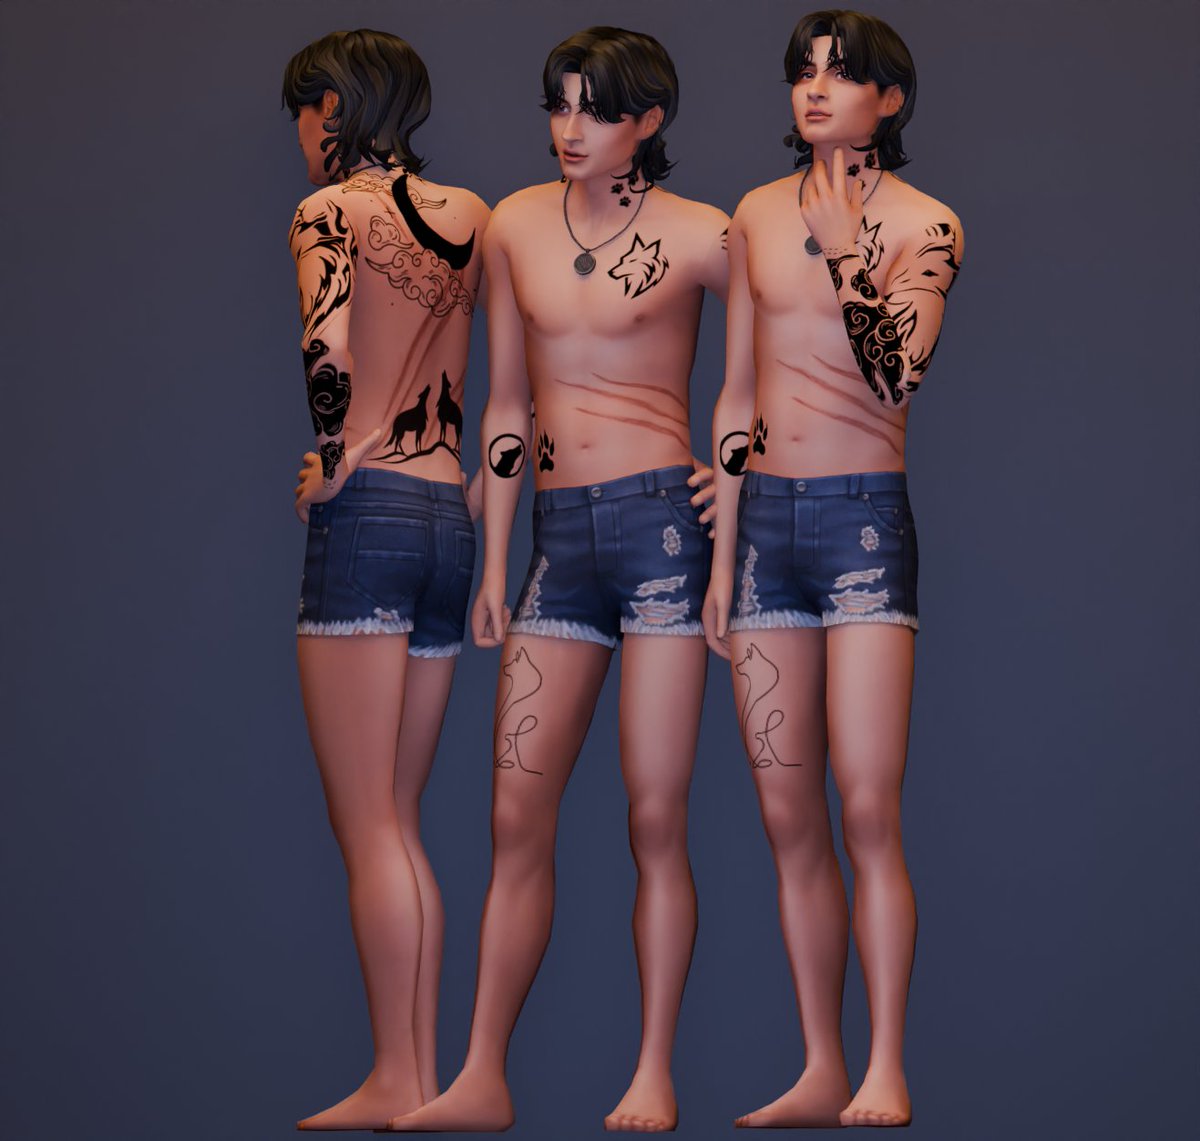 🚨𝗡𝗘𝗪 𝗖𝗖 𝗔𝗟𝗘𝗥𝗧!🚨
~ Wolf Gang Tattoo Set ~
₊˚⊹ Available now on our Patreon for early access
₊˚⊹ Public access : MAY 10
₊˚⊹ See thread for the link 

#sims4 #ts4 #sims4cc #ts4cc #sims4ccfinds #ts4ccfinds